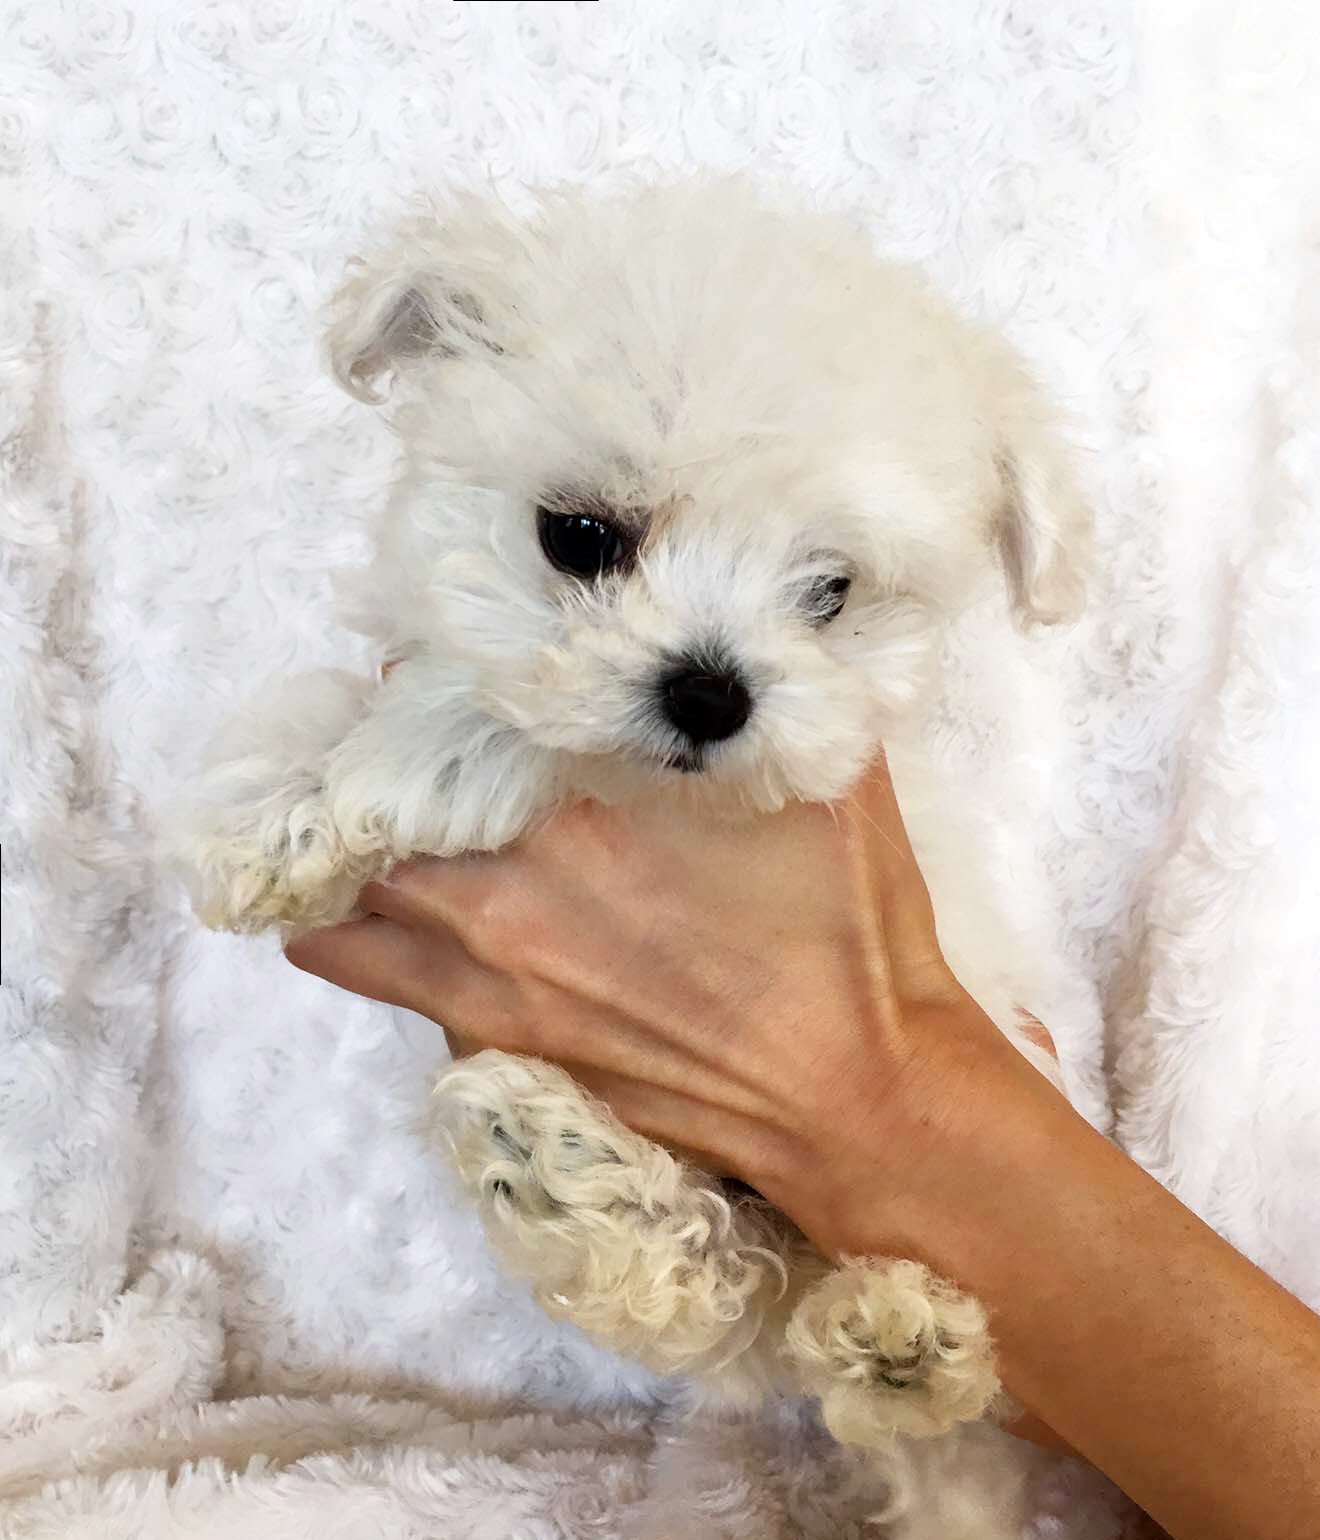 Teacup morkie puppy for sale! | iHeartTeacups